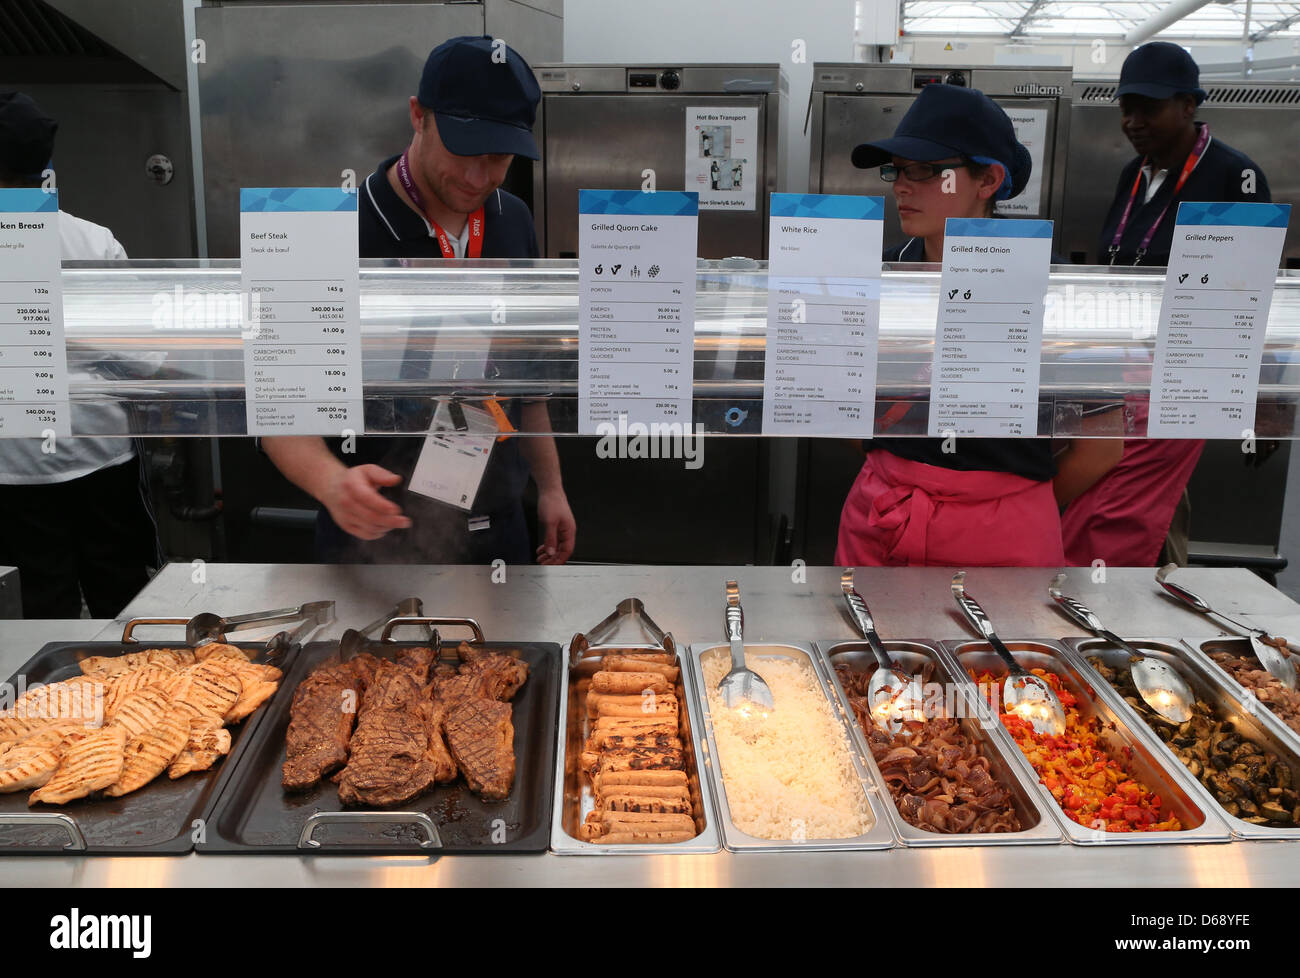 British dishes are displayed in the Restaurant of the Olympic village in London, Great Britain, 24 July 2012. The London 2012 Olympic Games will start on 27 July 2012. Photo: Michael Kappeler dpa  +++(c) dpa - Bildfunk+++ Stock Photo